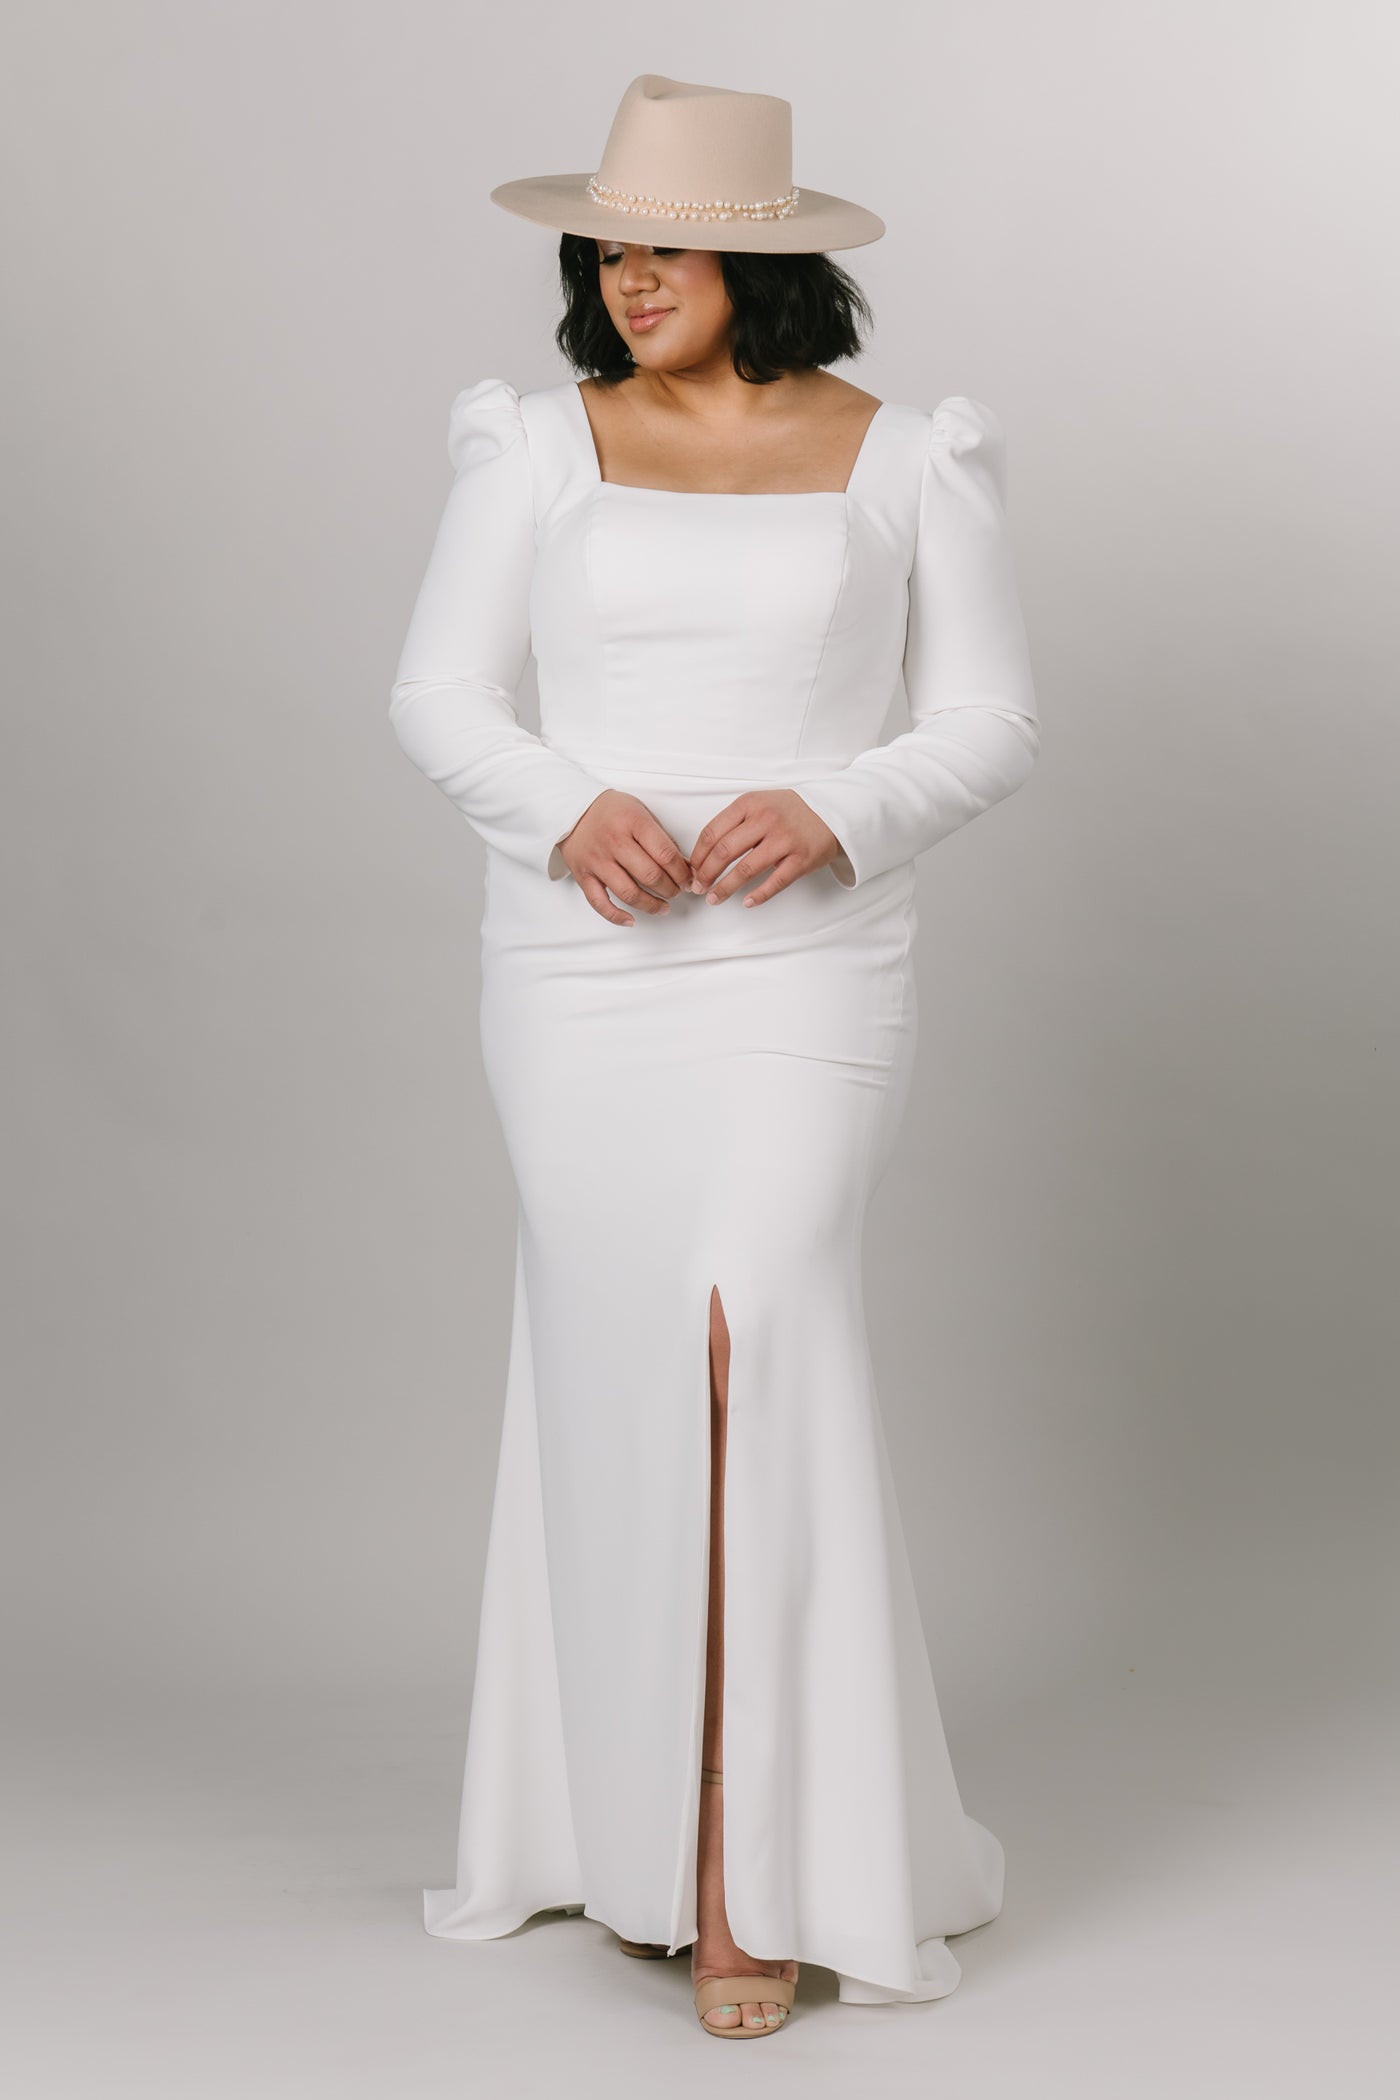 Front view of modest wedding dress with long puffed sleeves. This dress is fitted with a knee high slit and a square neck line. Model is styled with a boho hat to create the overall look.